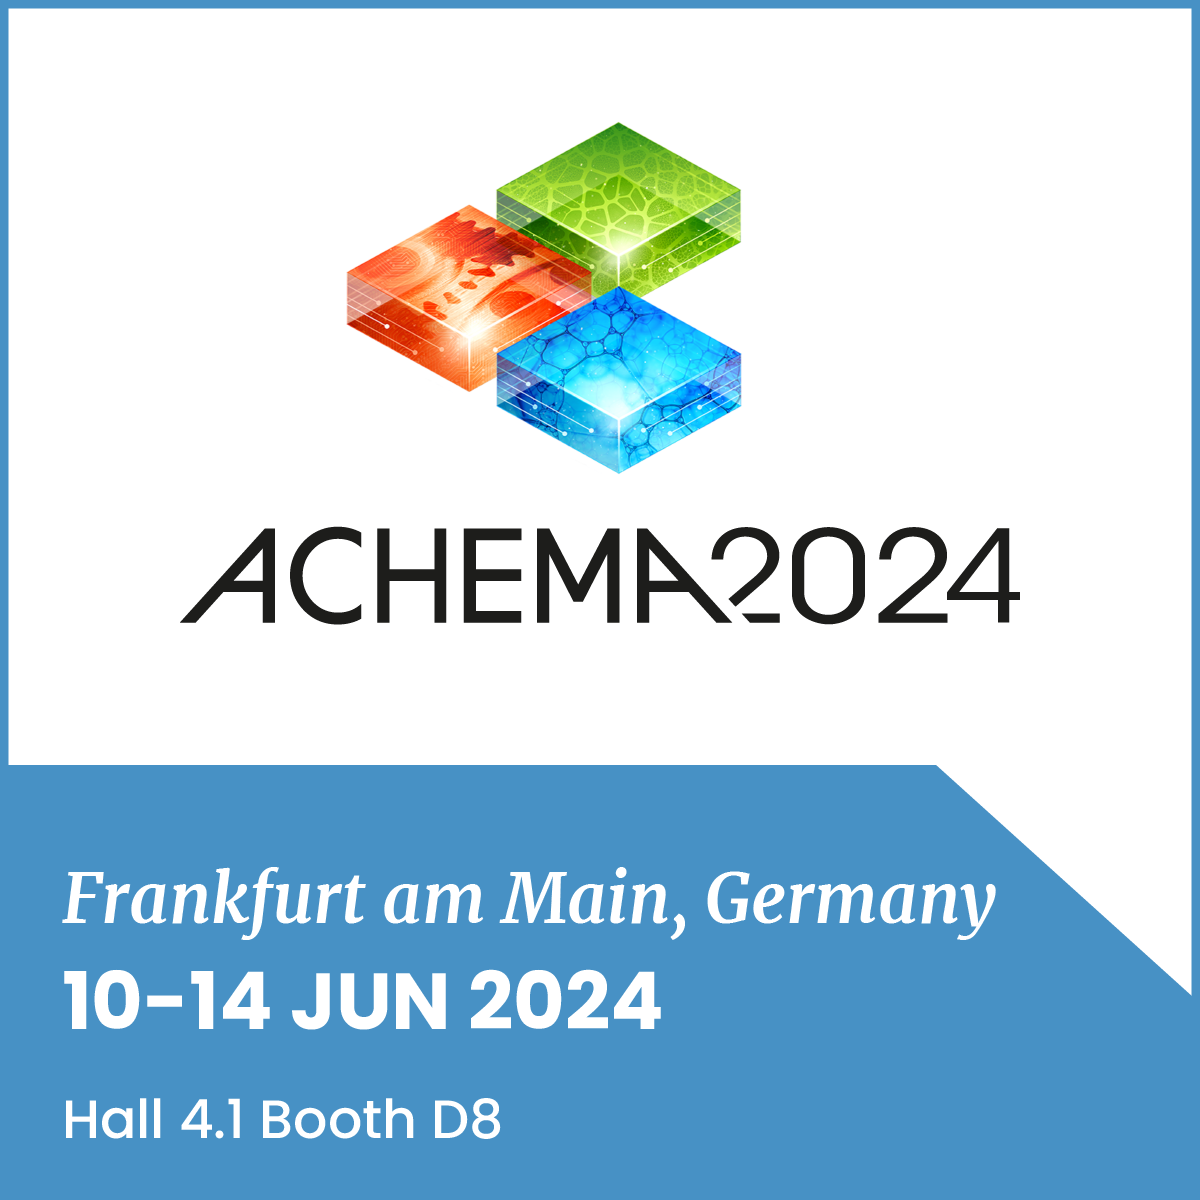 Teaser of ACHEMA event in Frankfurt, Germany. 10-14 June, 2024 Hall 4.1, Booth B7